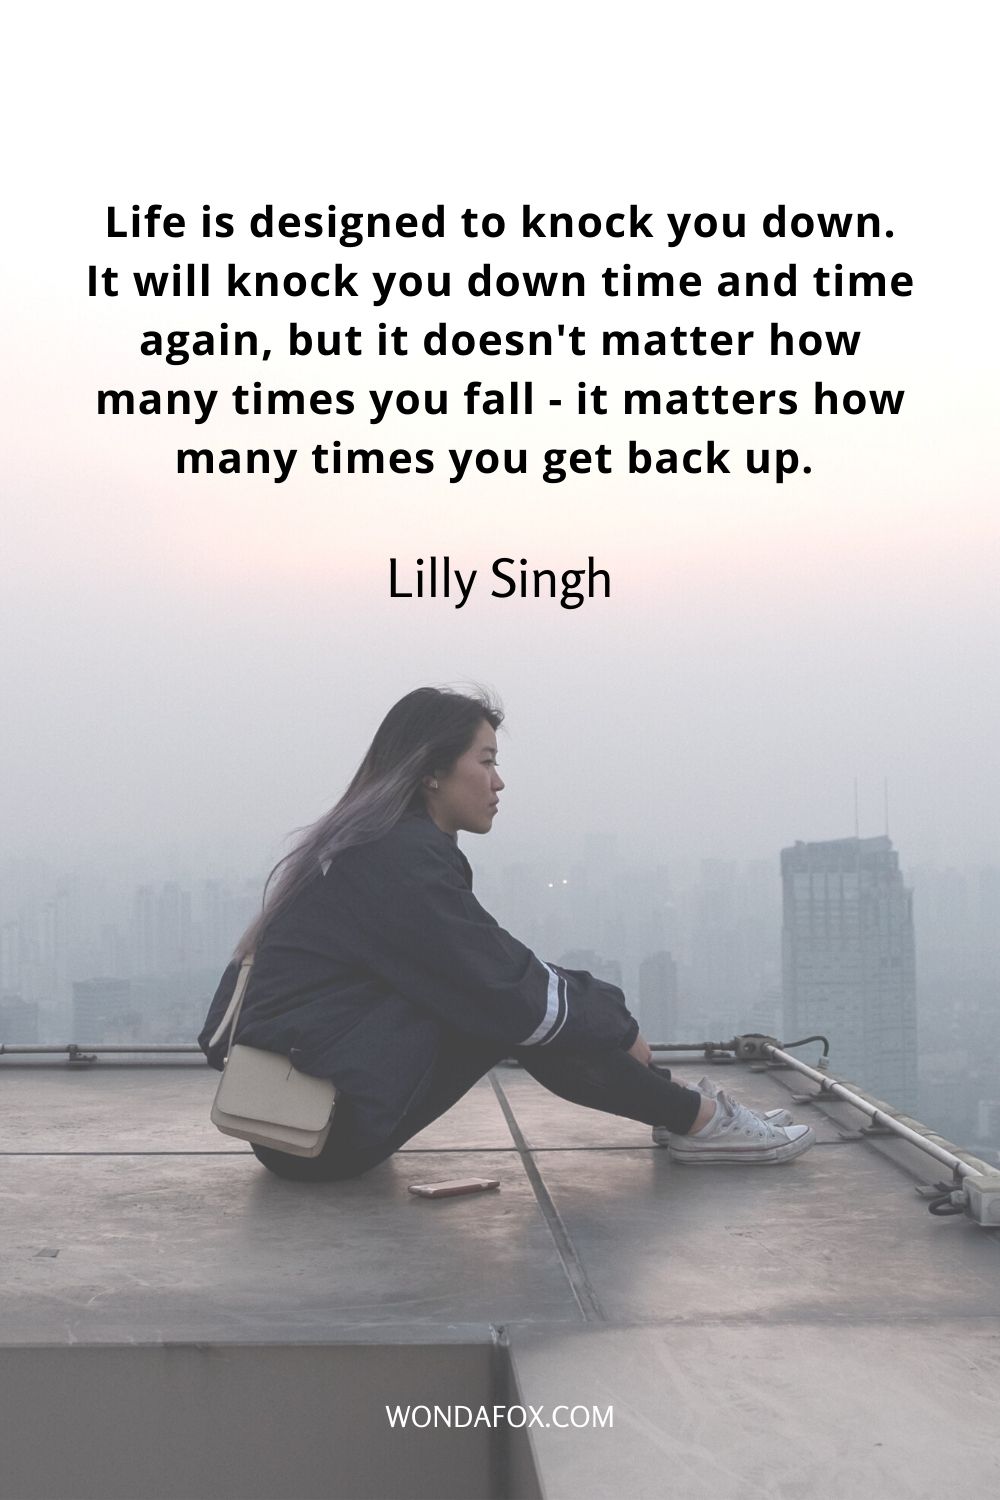 Life is designed to knock you down. It will knock you down time and time again, but it doesn't matter how many times you fall - it matters how many times you get back up. 